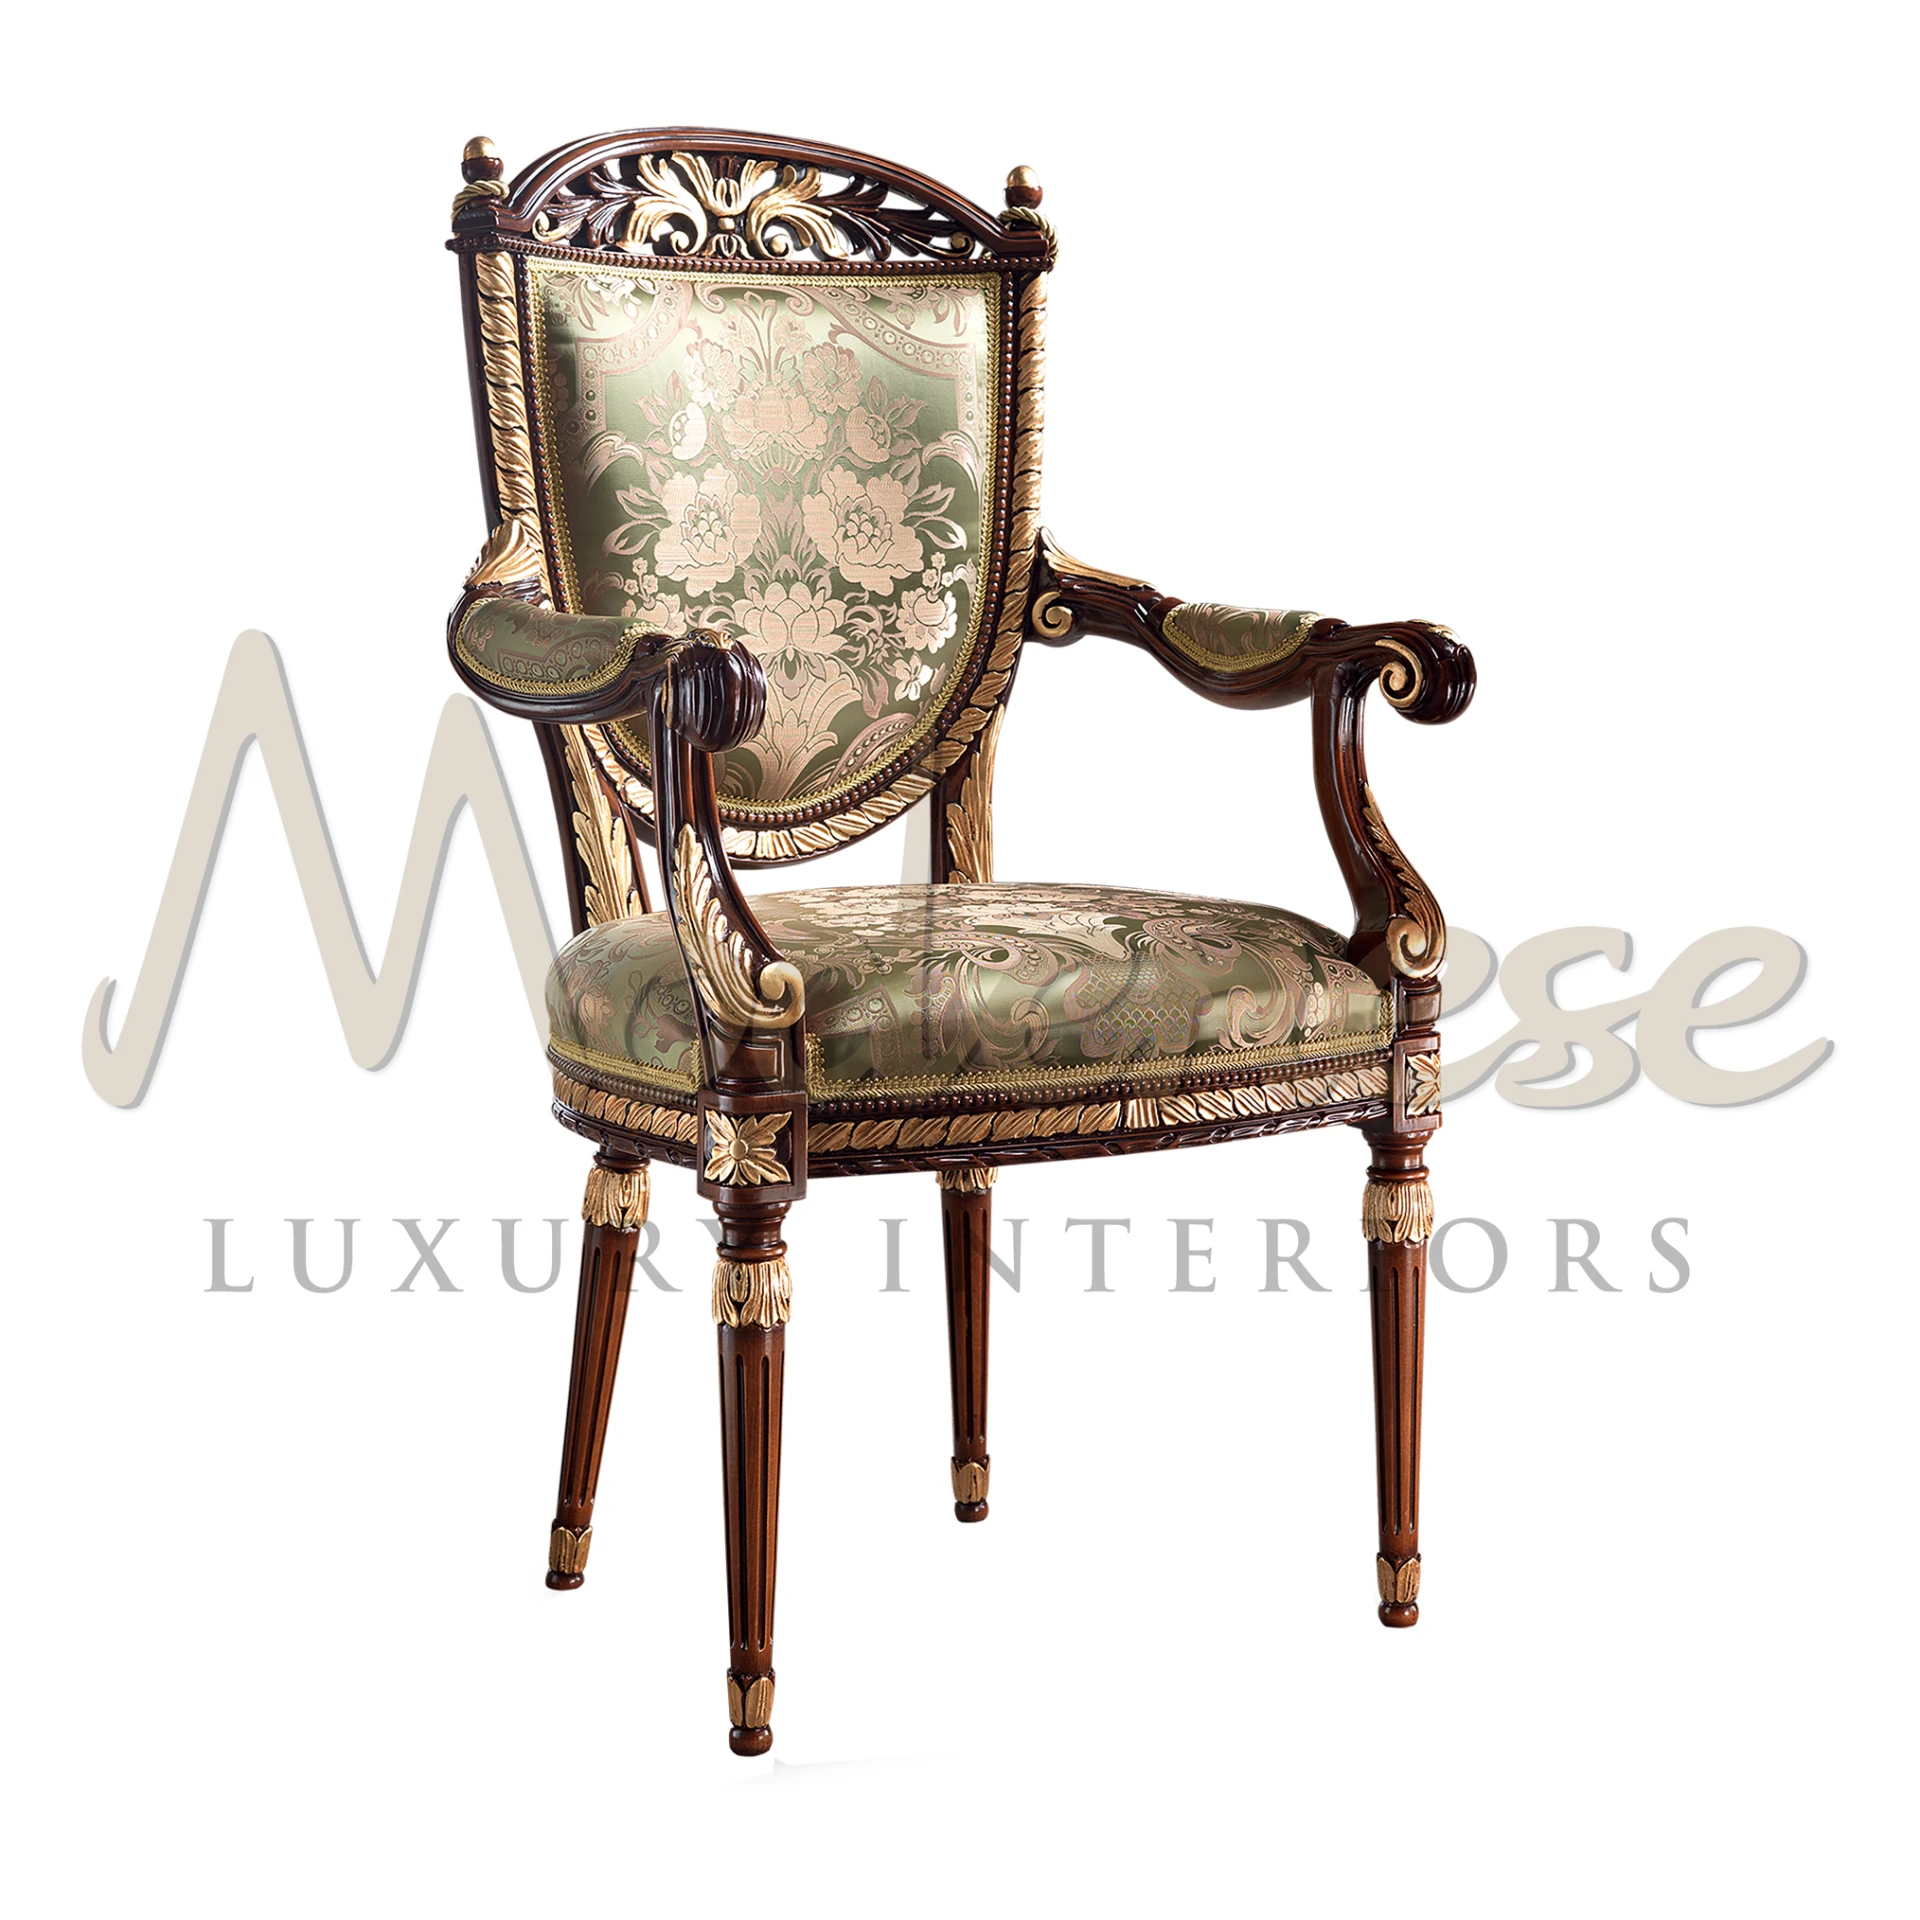 Experience luxury with this upholstered empire armchair, adorned with gold leaf details and premium floral fabric in green.